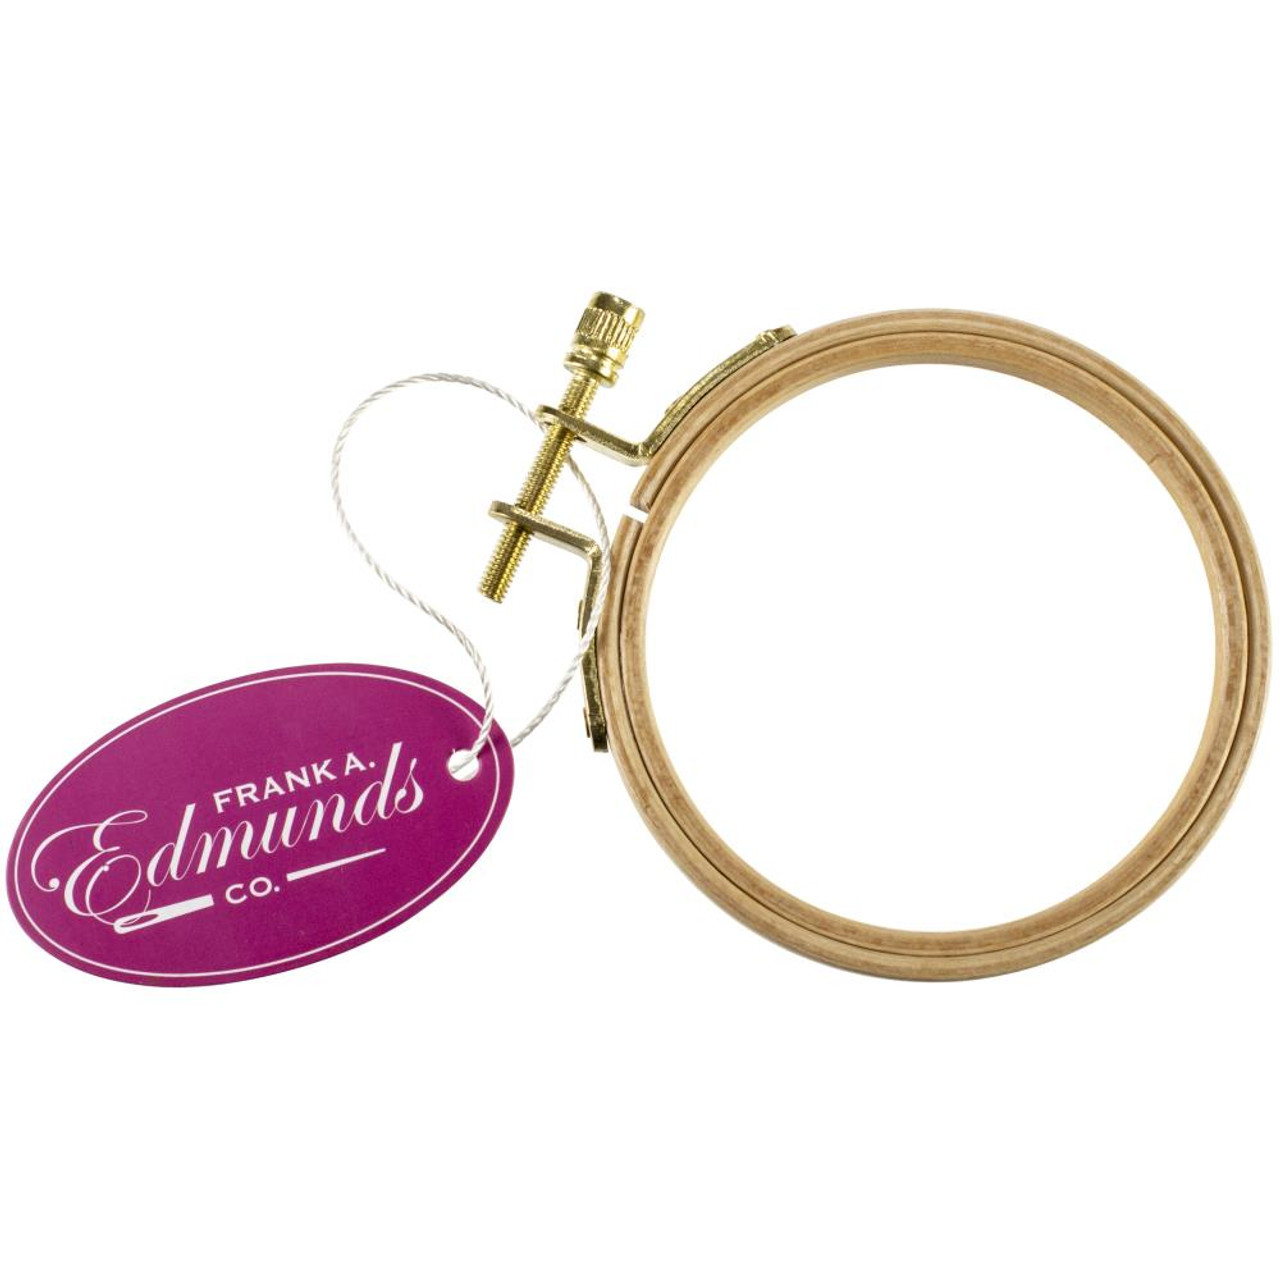 Frank A. Edmunds Beechwood Embroidery Hoop 11 w/ 15mm Wide Band